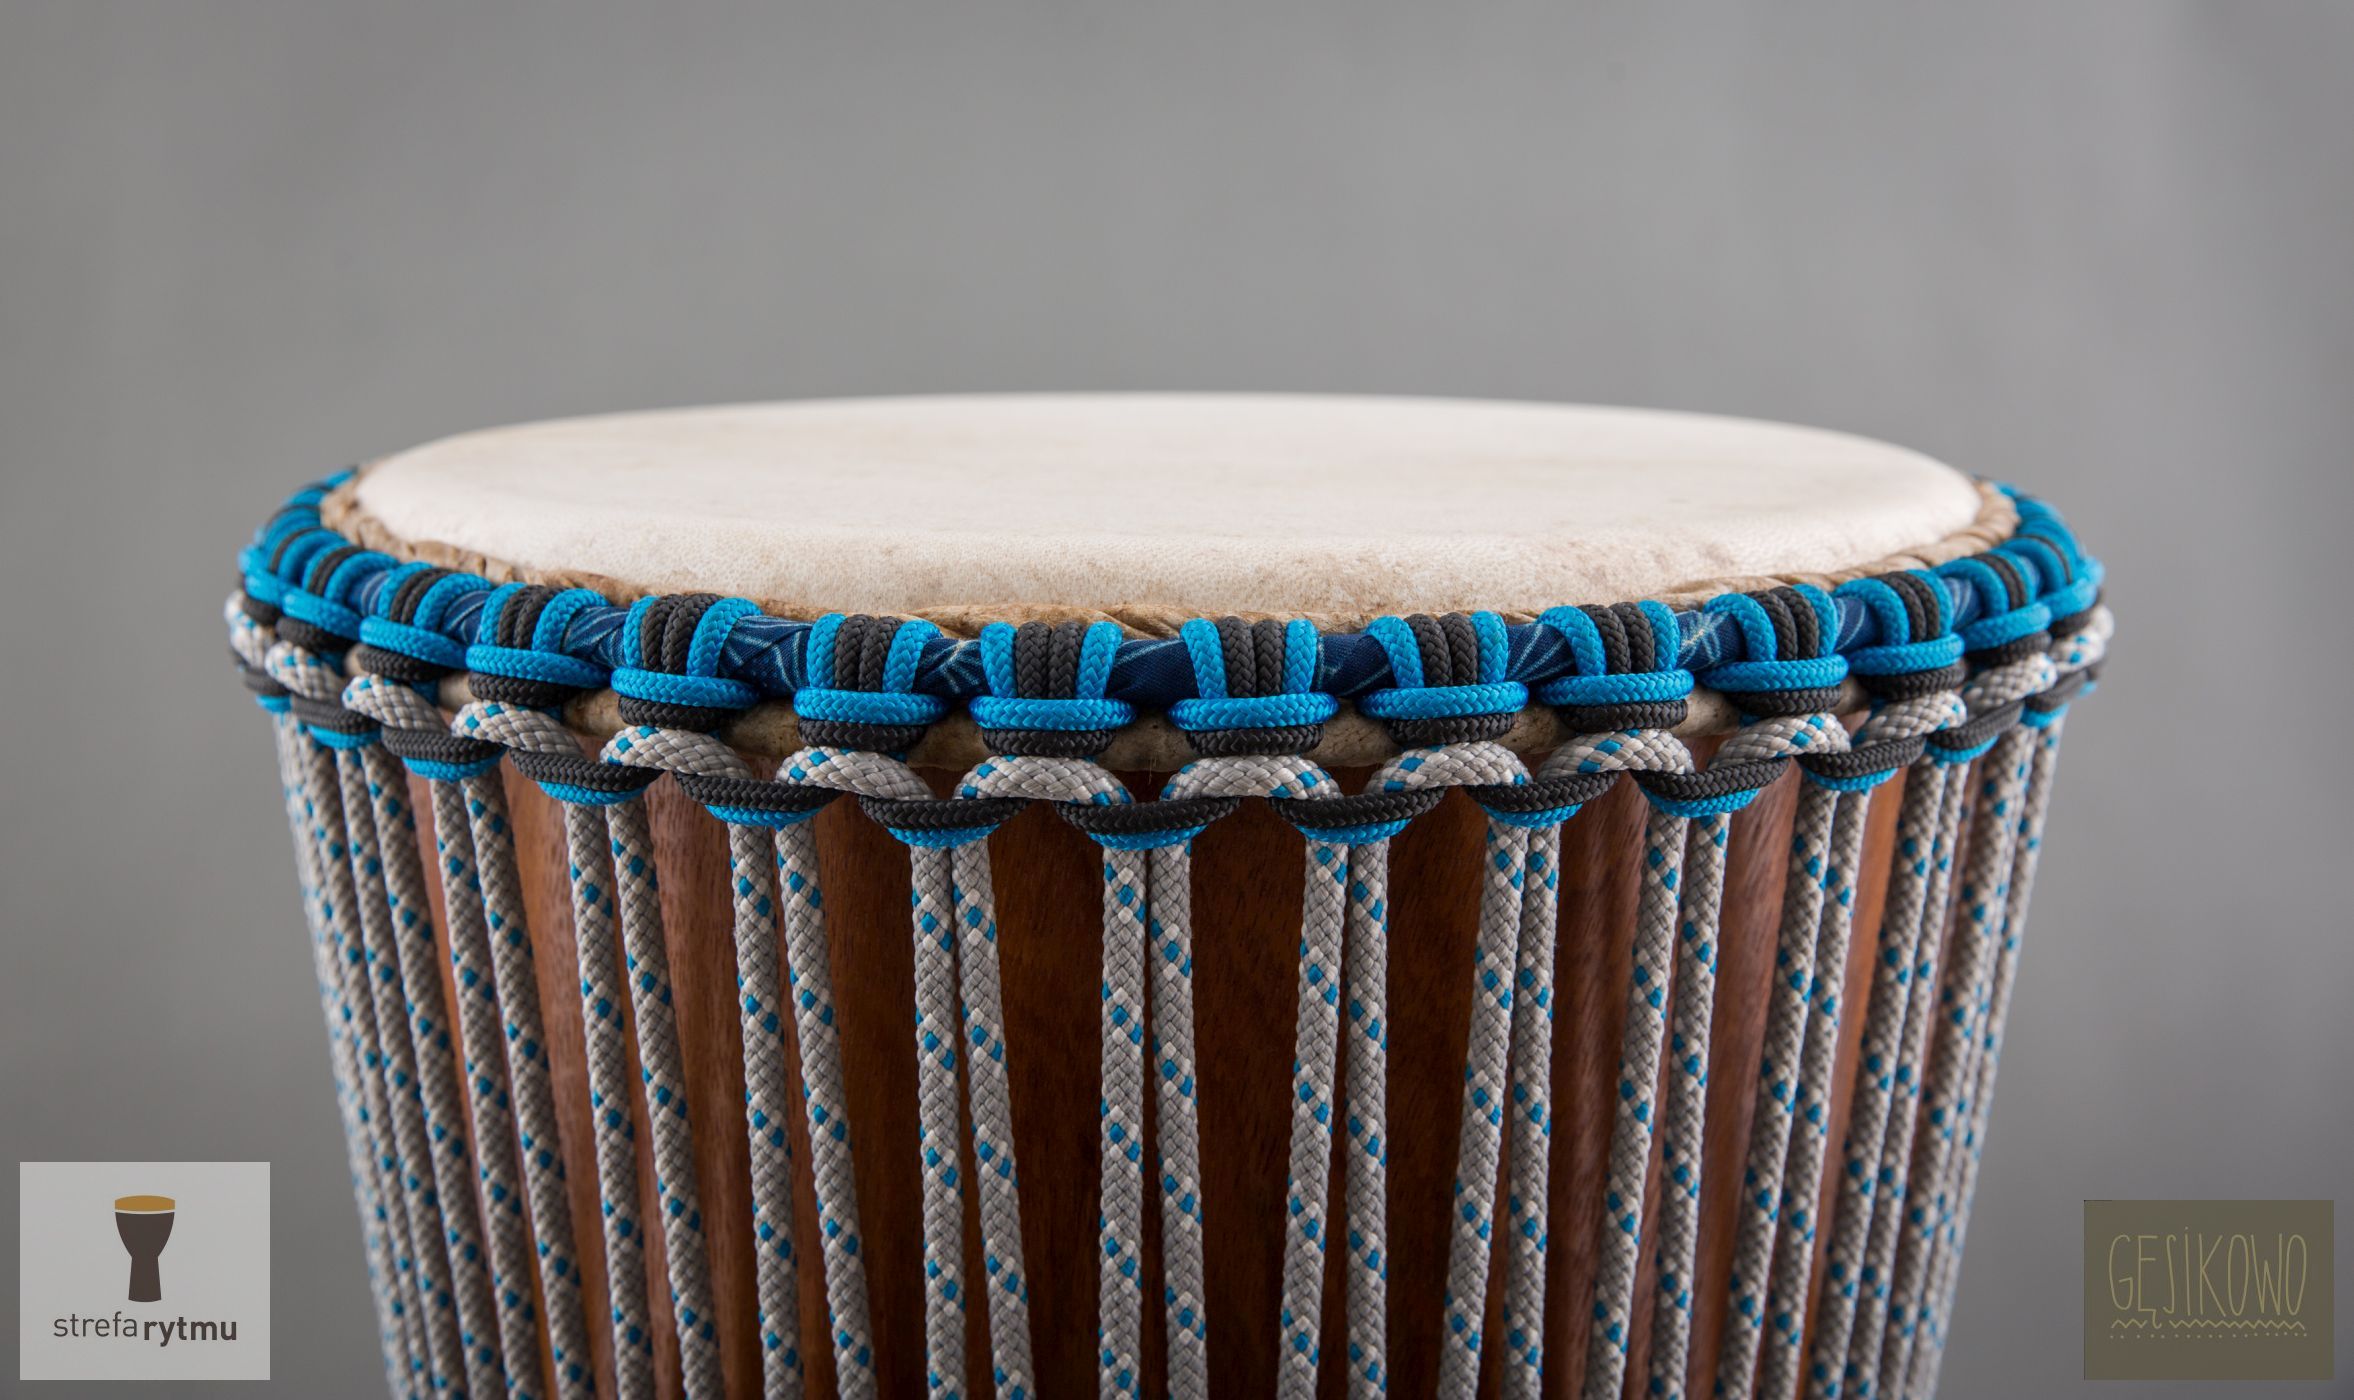 Big, extraordinary djembe from Guinea. Just ideal